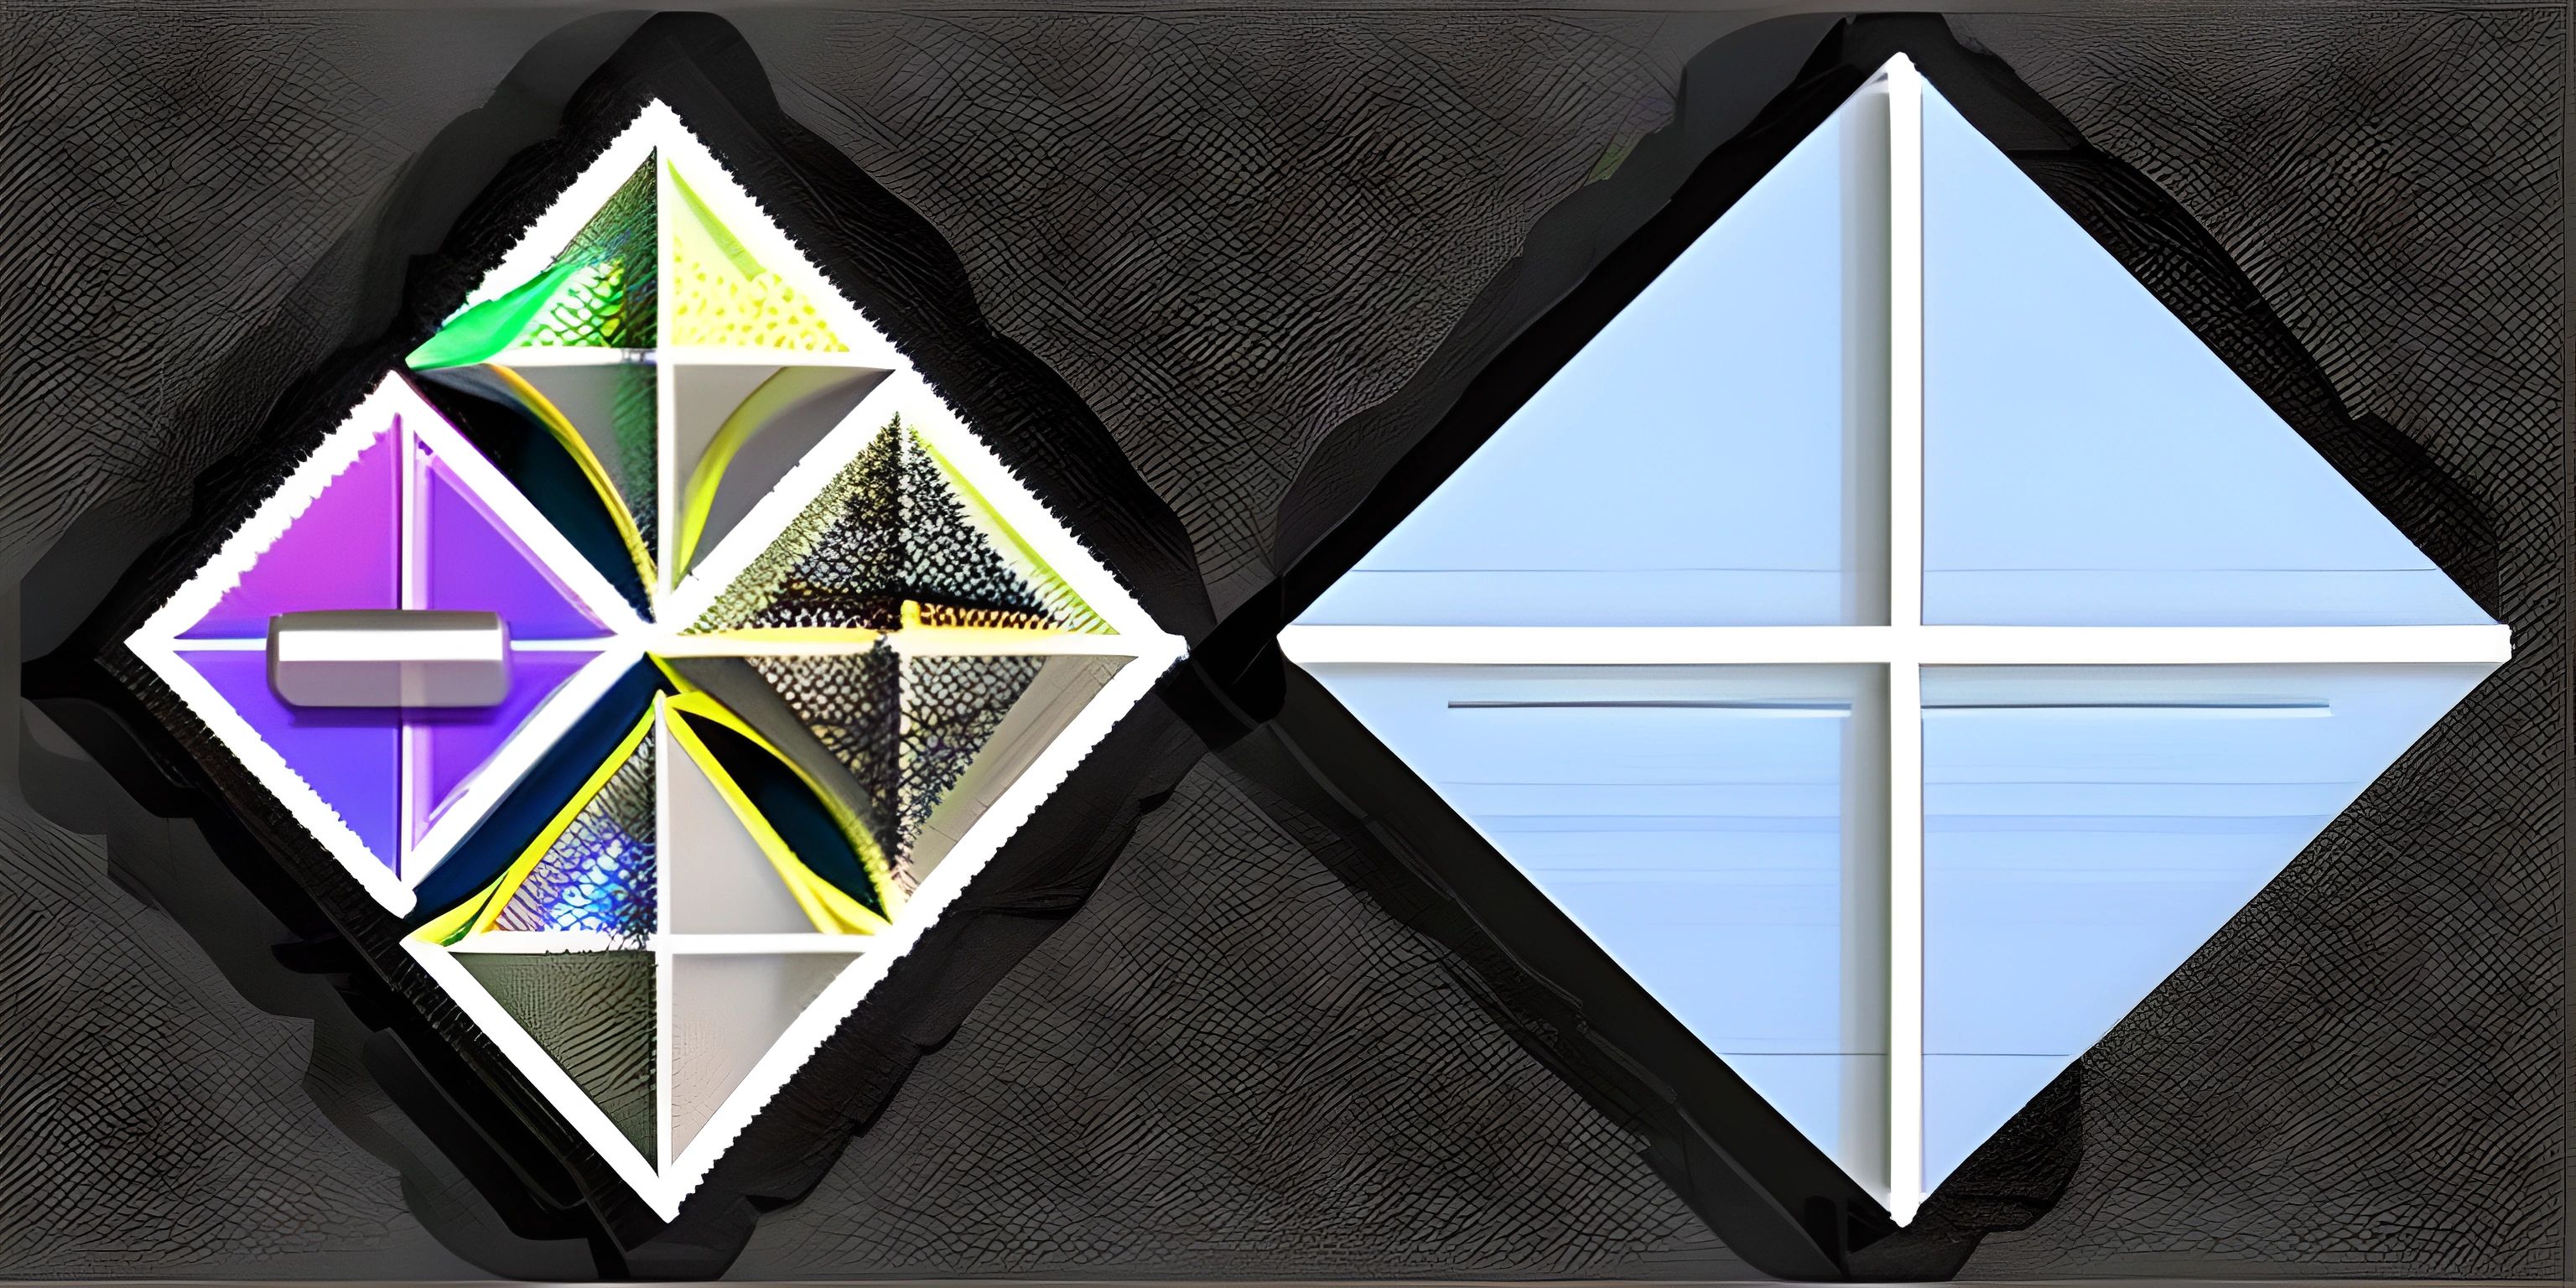 two diamond shaped windows have different colors and patterns on them in the same photo, as well as a blue background